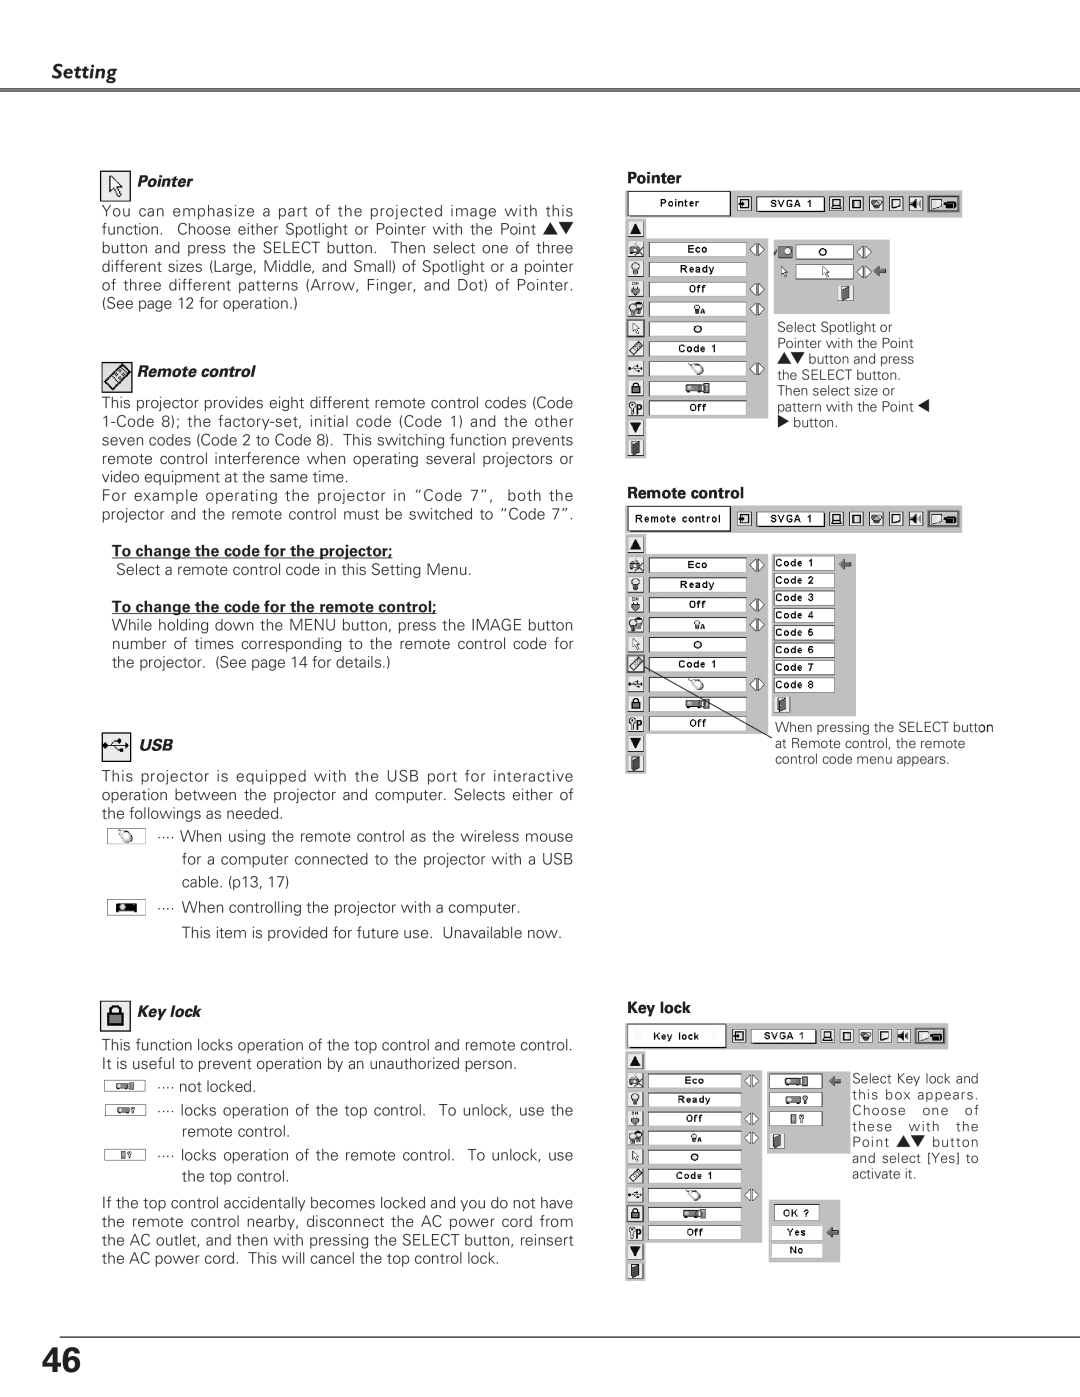 Eiki LC-XB26, LC-XB21 owner manual Setting, Pointer, Remote control, To change the code for the projector, Key lock 